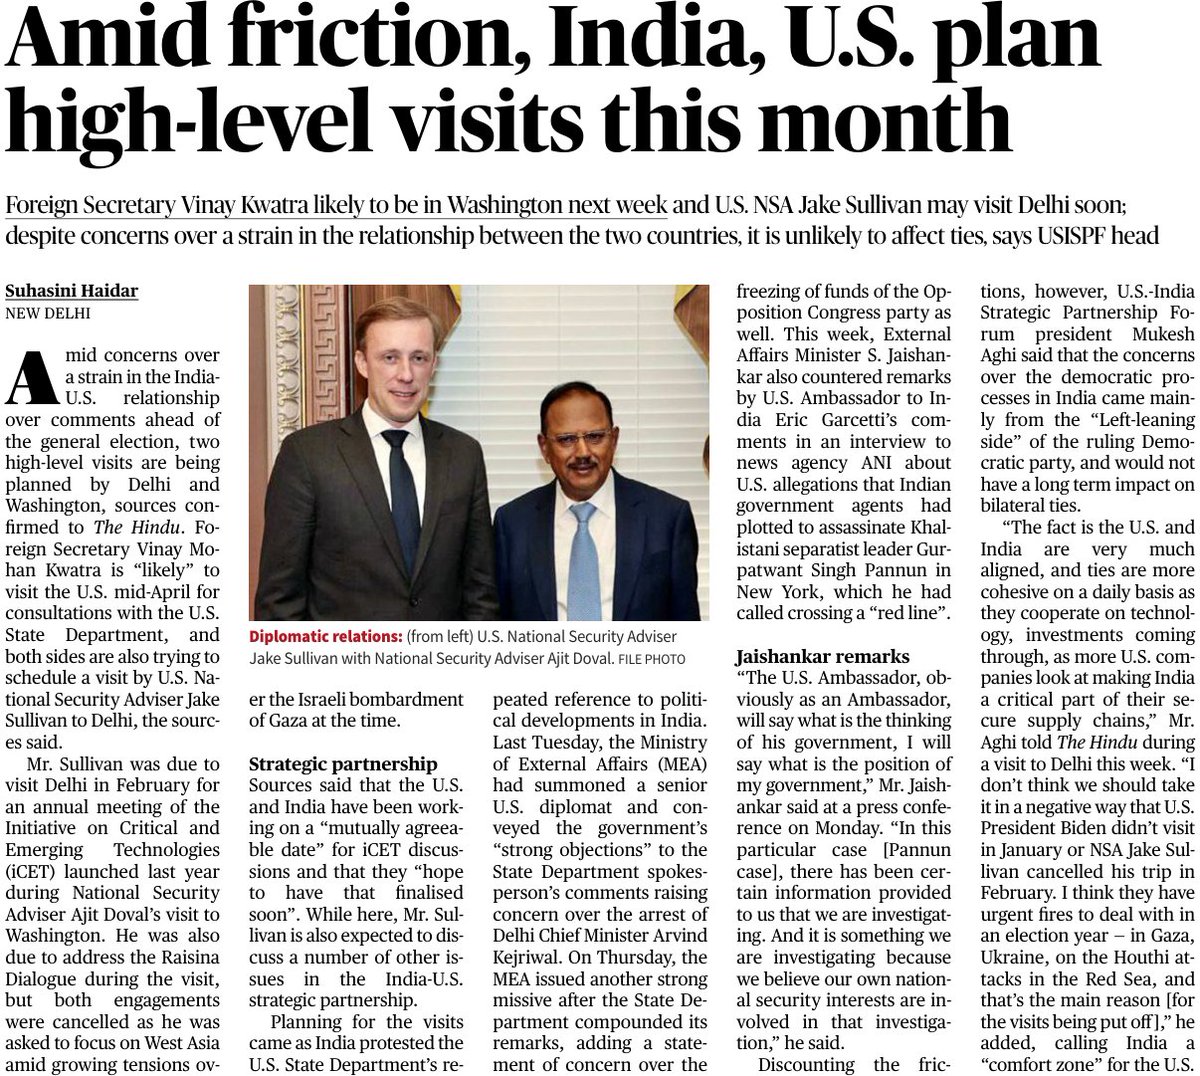 'The U.S. and India are very much aligned, and ties are more cohesive on a daily basis as they cooperate on technology, investments coming through, as more U.S. companies look at making India a critical part of their secure supply chains.' — Dr. @MukeshAghi, President & CEO,…